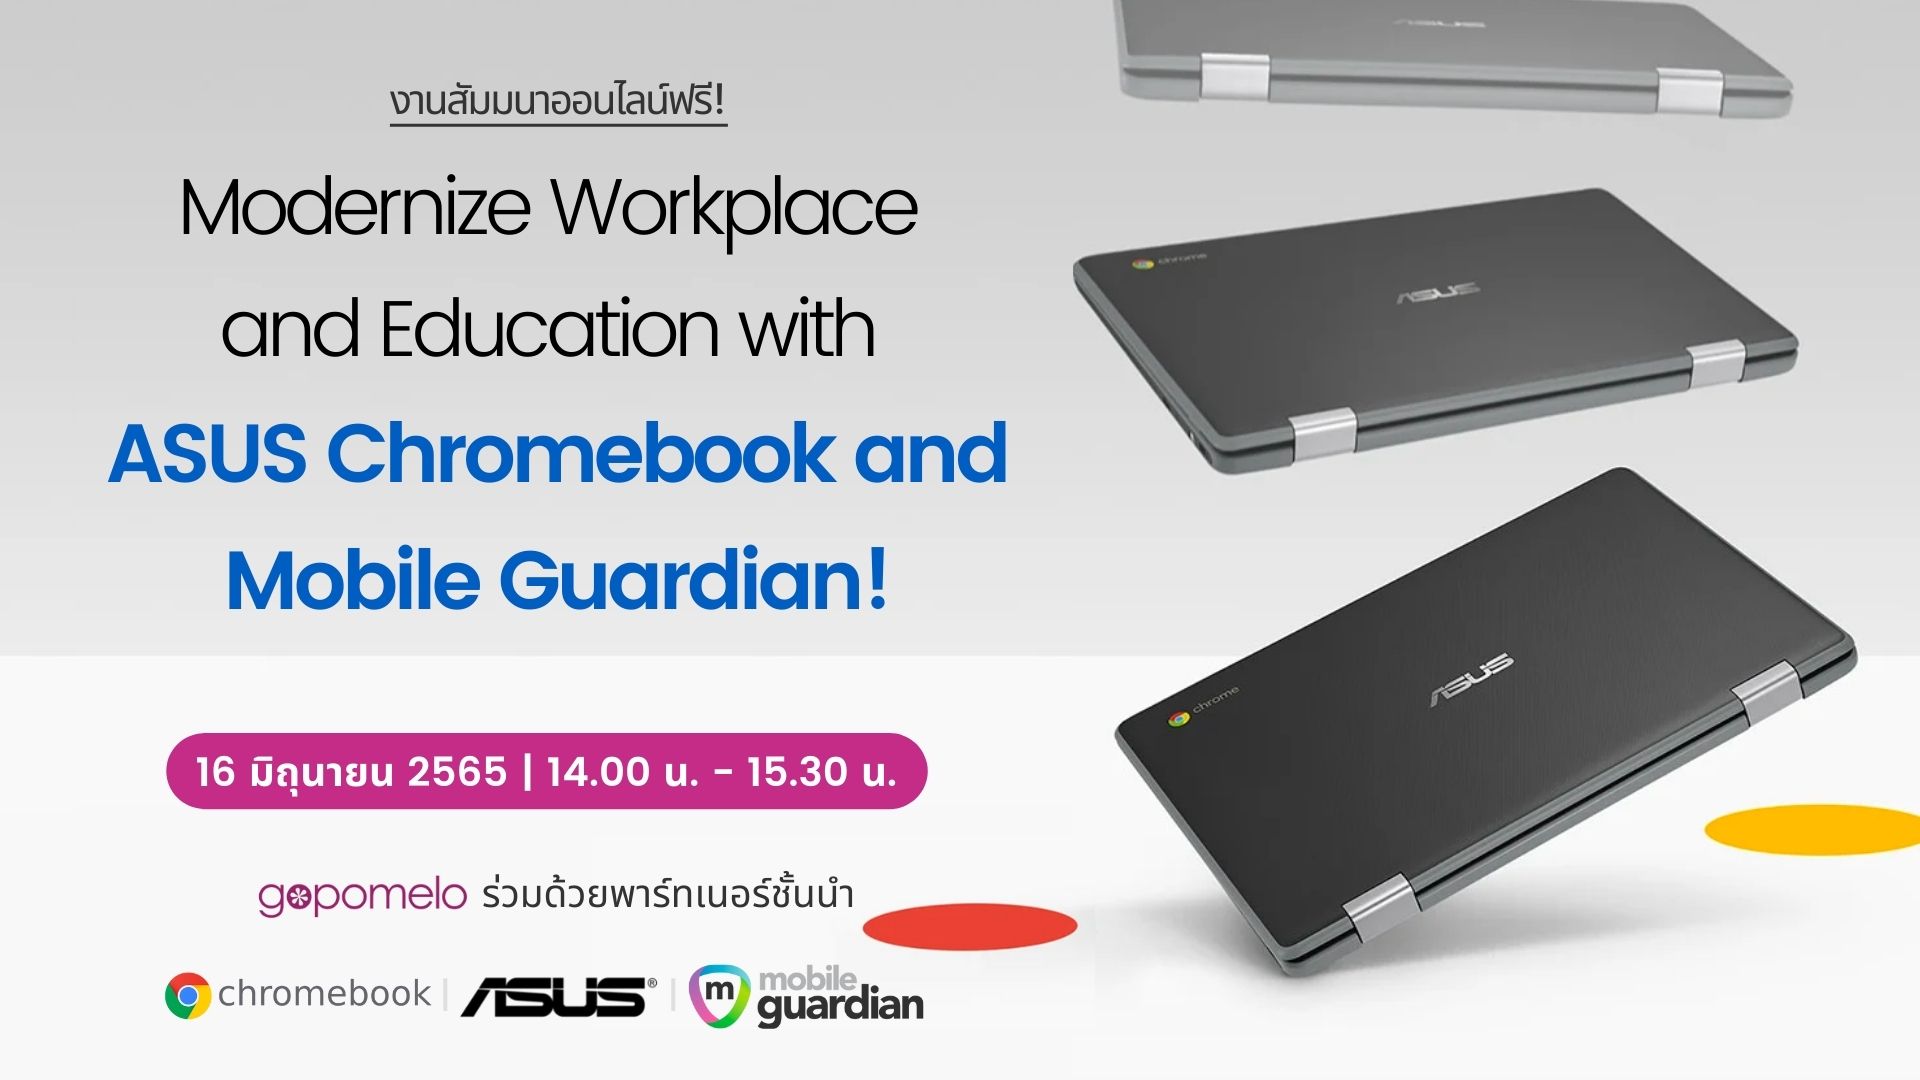 Modernize Workplace and Education with ASUS Chromebook and Mobile Guardian